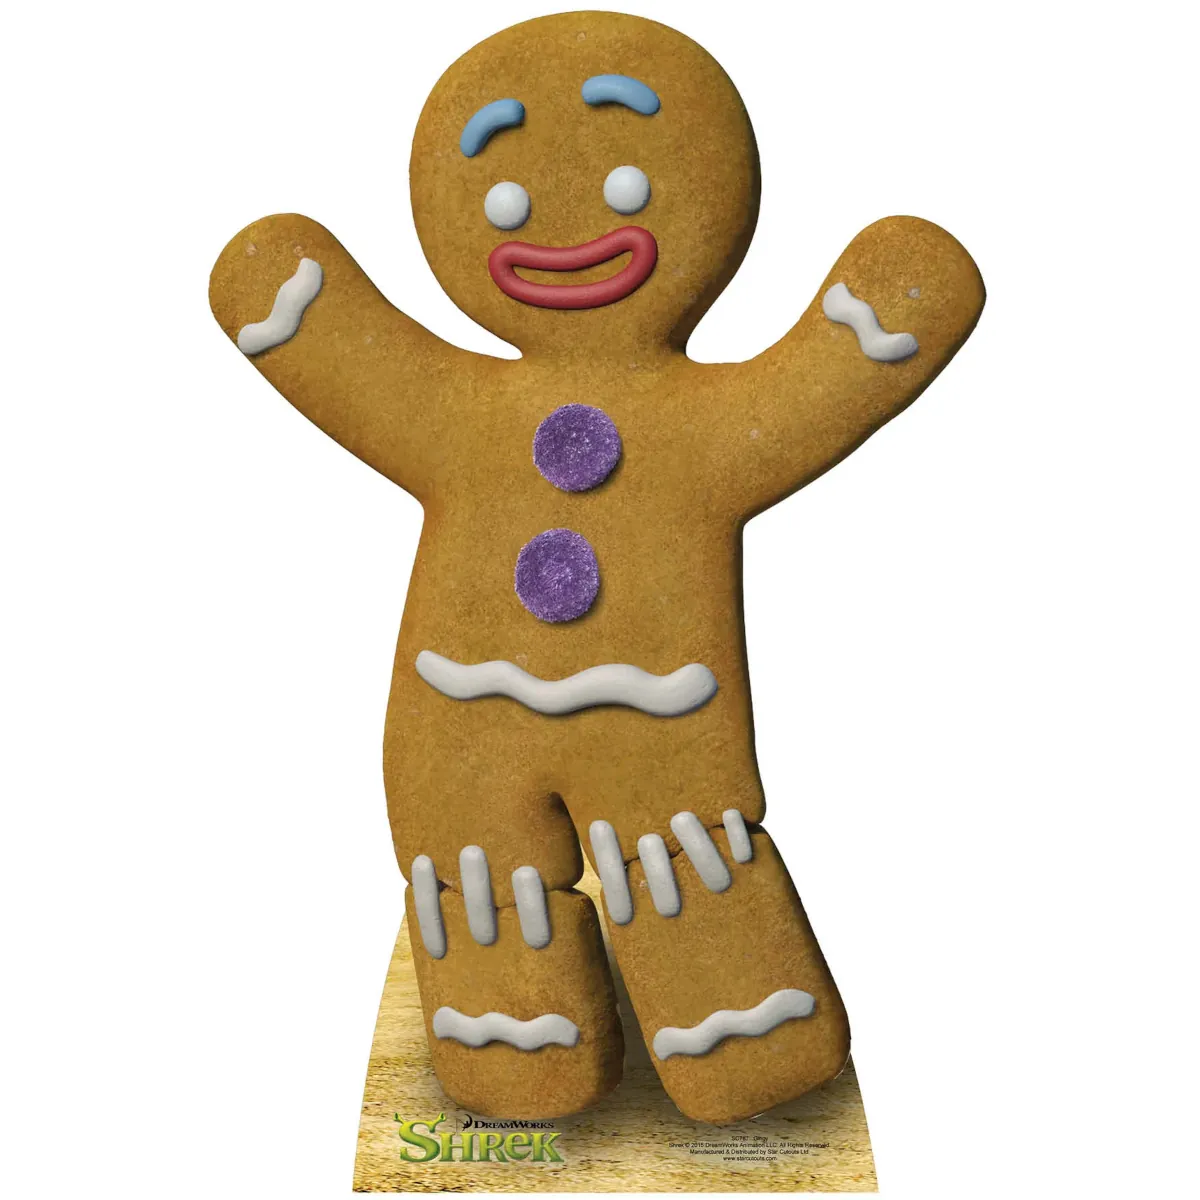 SC787 Gingy 'The Gingerbread Man' (DreamWorks Animation Shrek) Mini Cardboard Cutout Standee Front